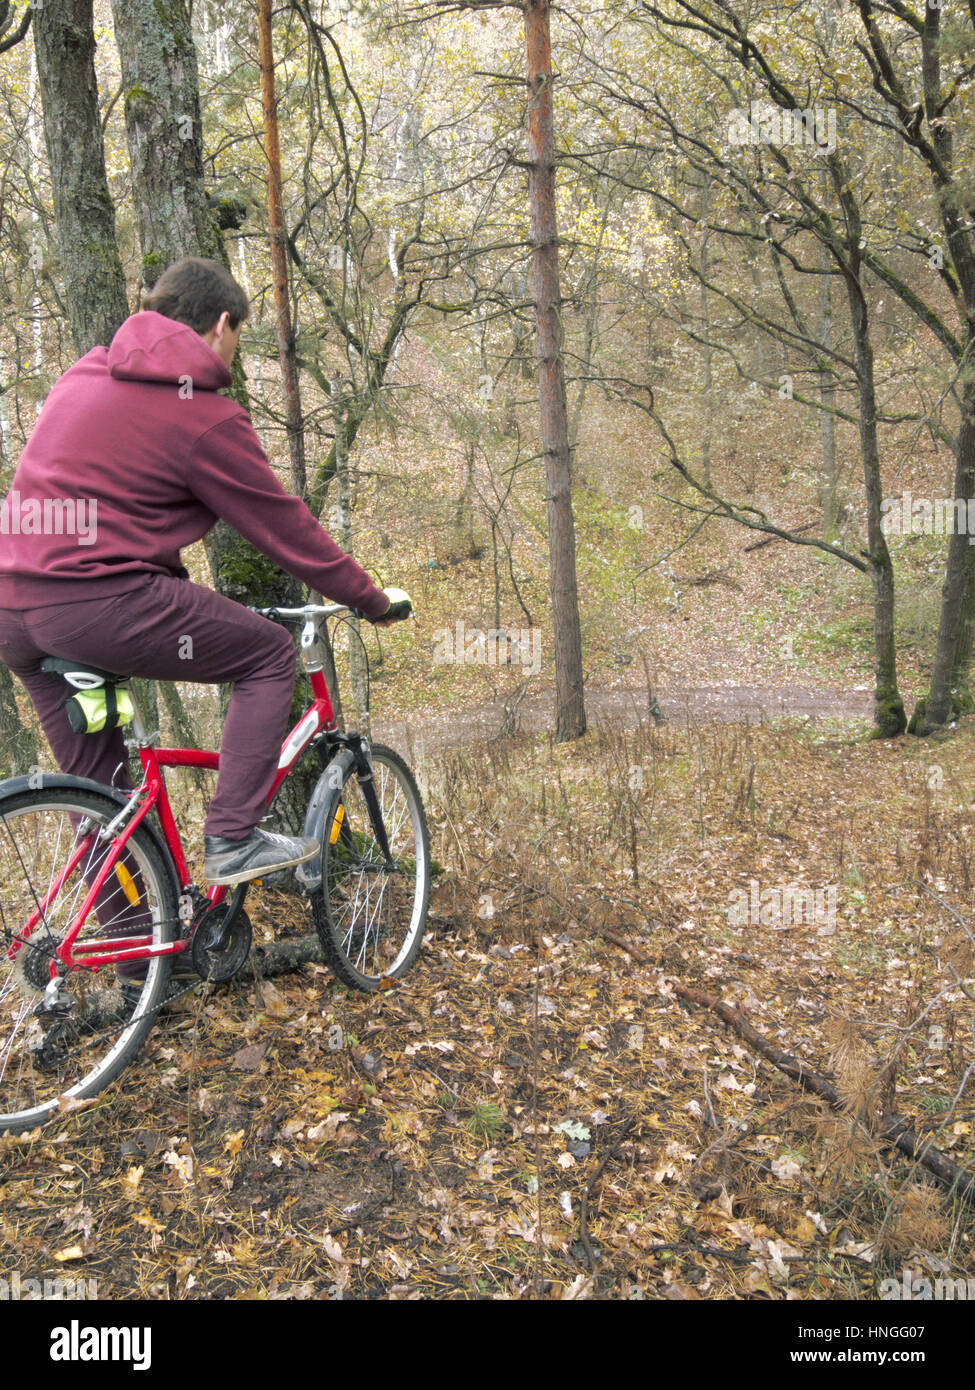 The guy on the red bicycle in the woods Stock Photo